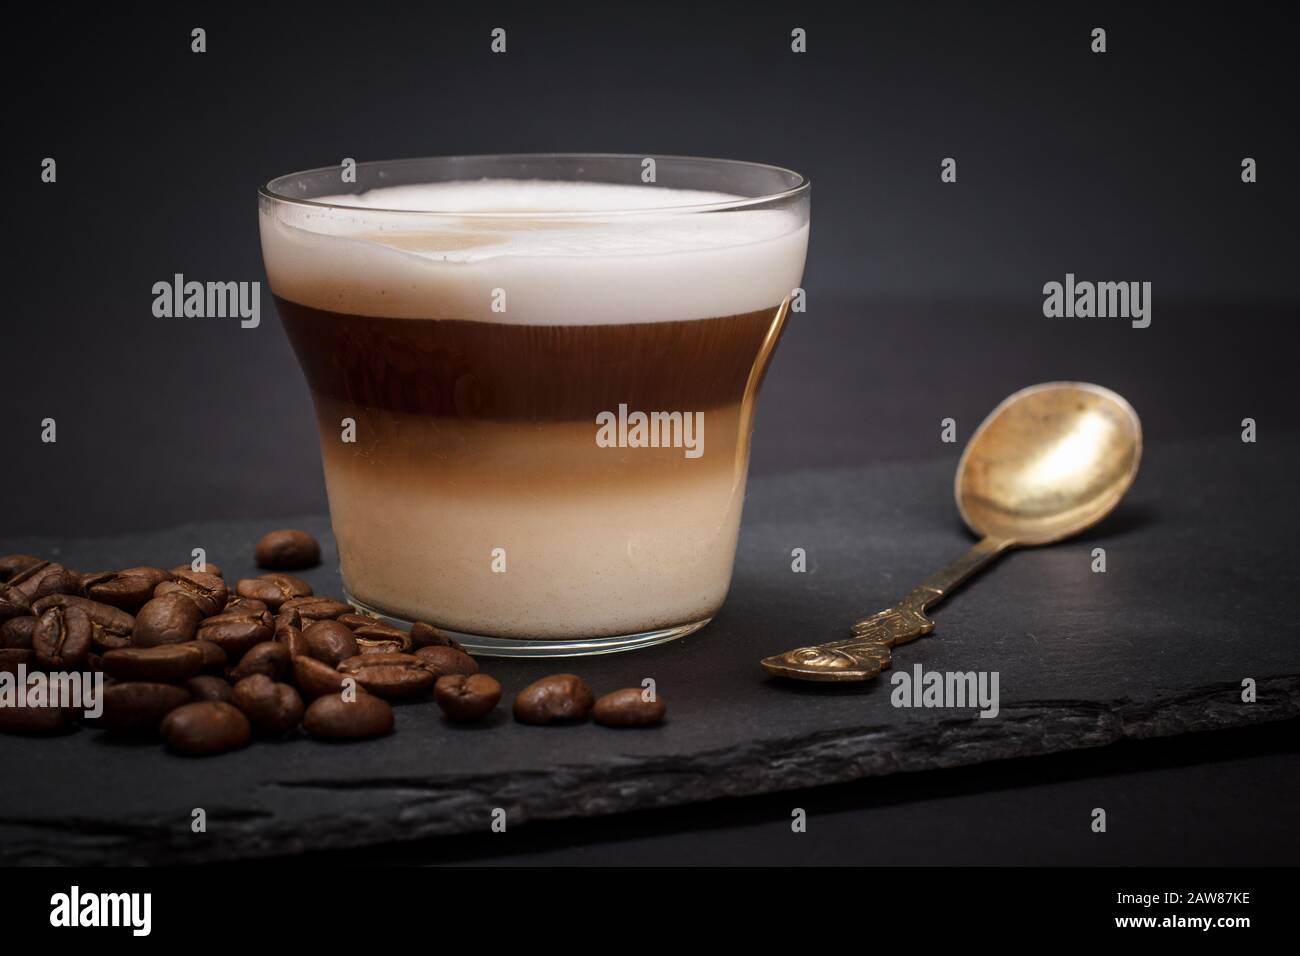 Cup of cappuccino, coffee beans and spoon on black background. Stock Photo